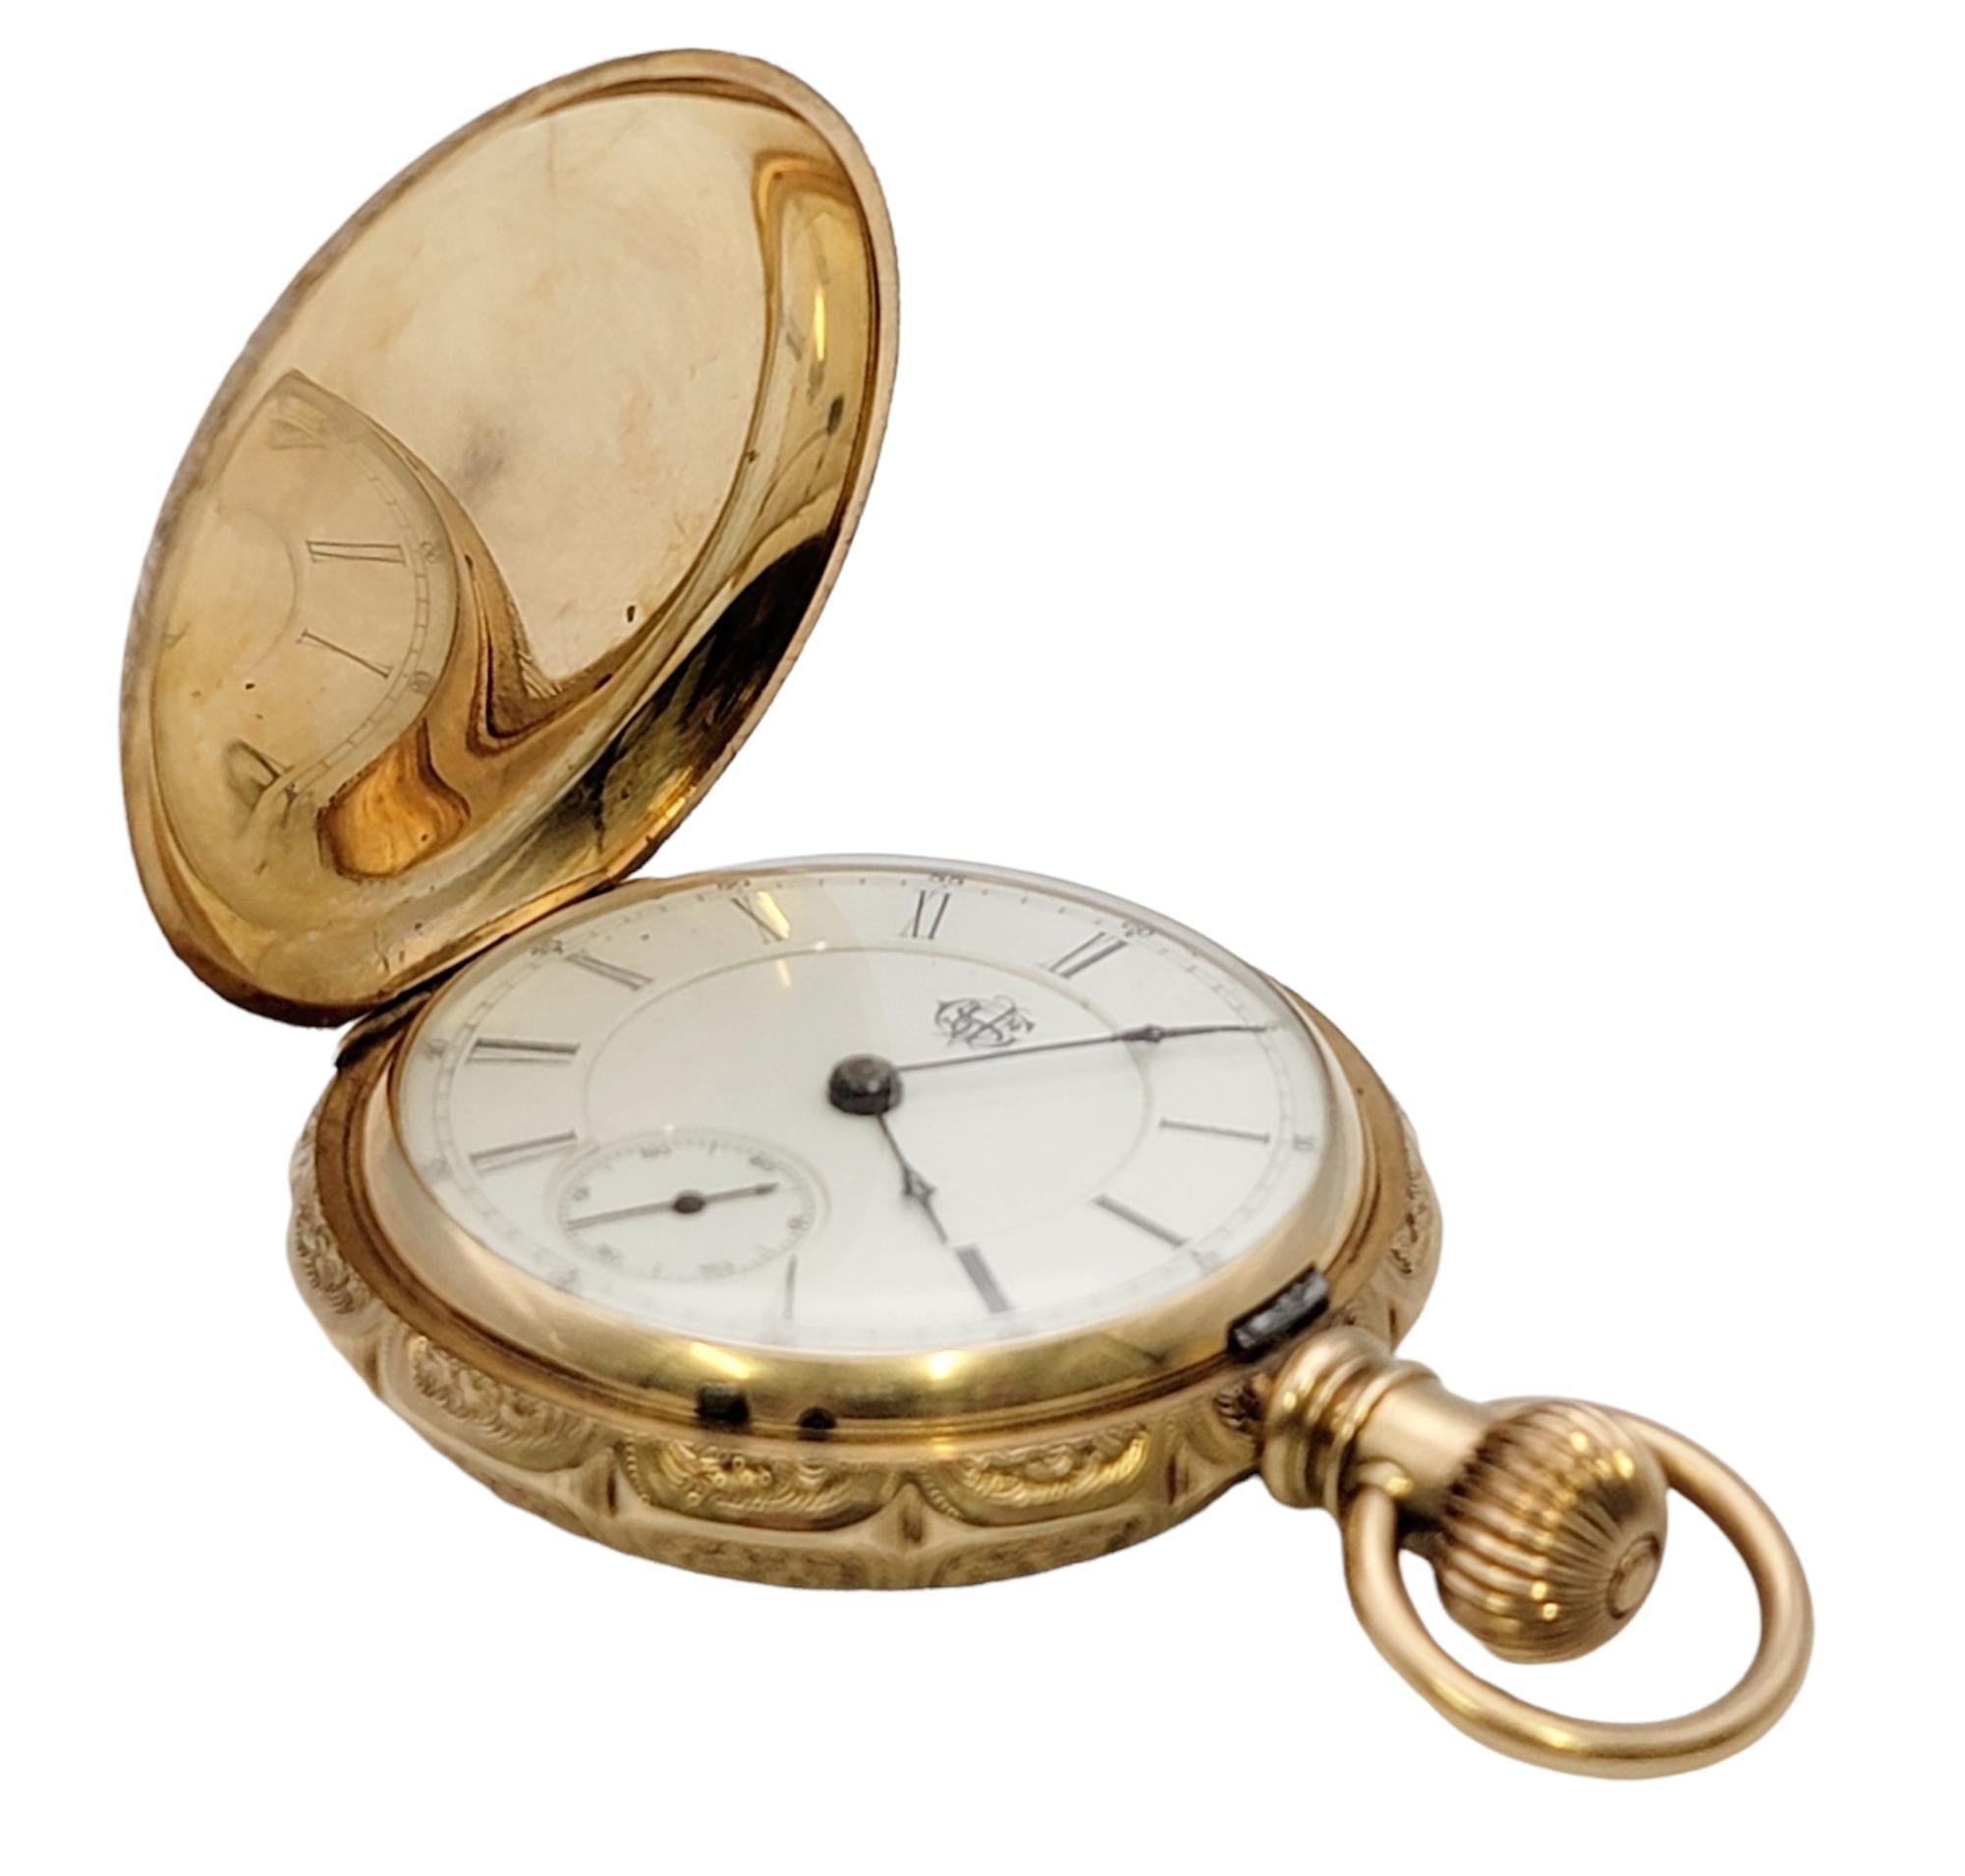 Vintage Waltham 14 Karat Yellow Gold Pocket Watch Circa 1888 Floral Engraving In Fair Condition For Sale In Scottsdale, AZ